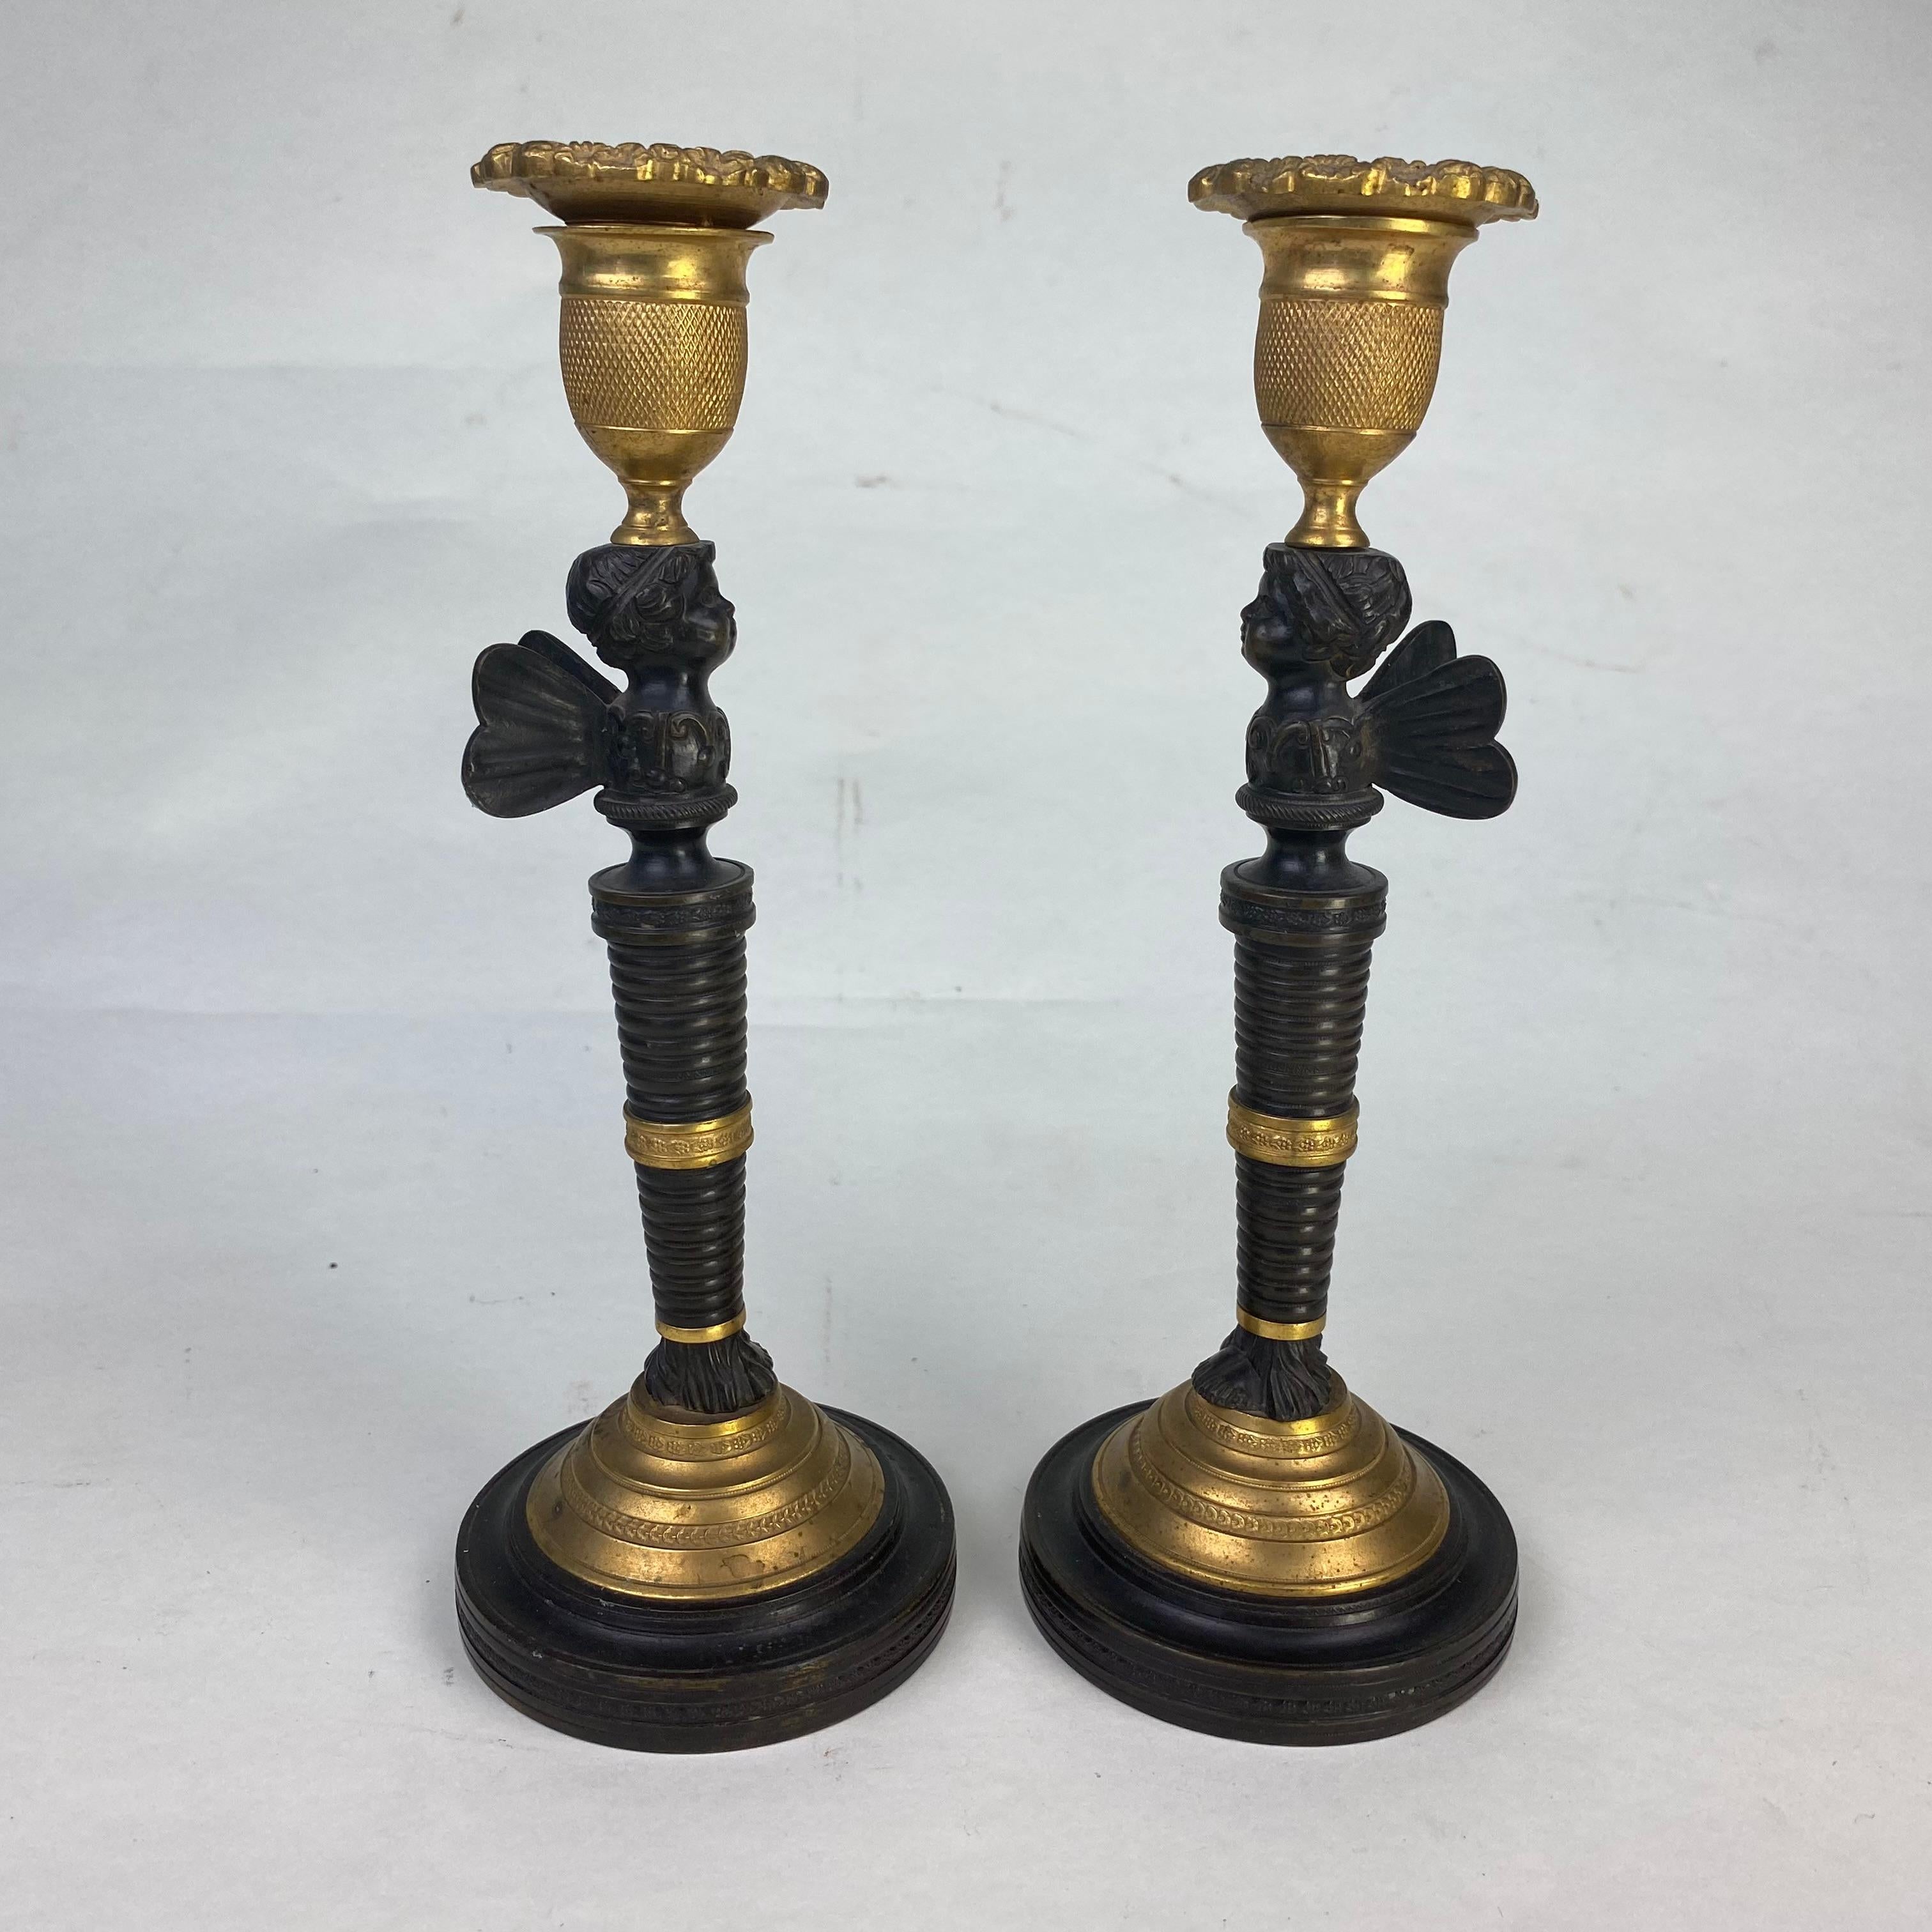 A good quality pair of bronze and ormolu candlesticks with ormolu socles on decorated brionze bases supporting tapered ringed columns with bronze winged putti and ormolu sconces with removable drip pans.